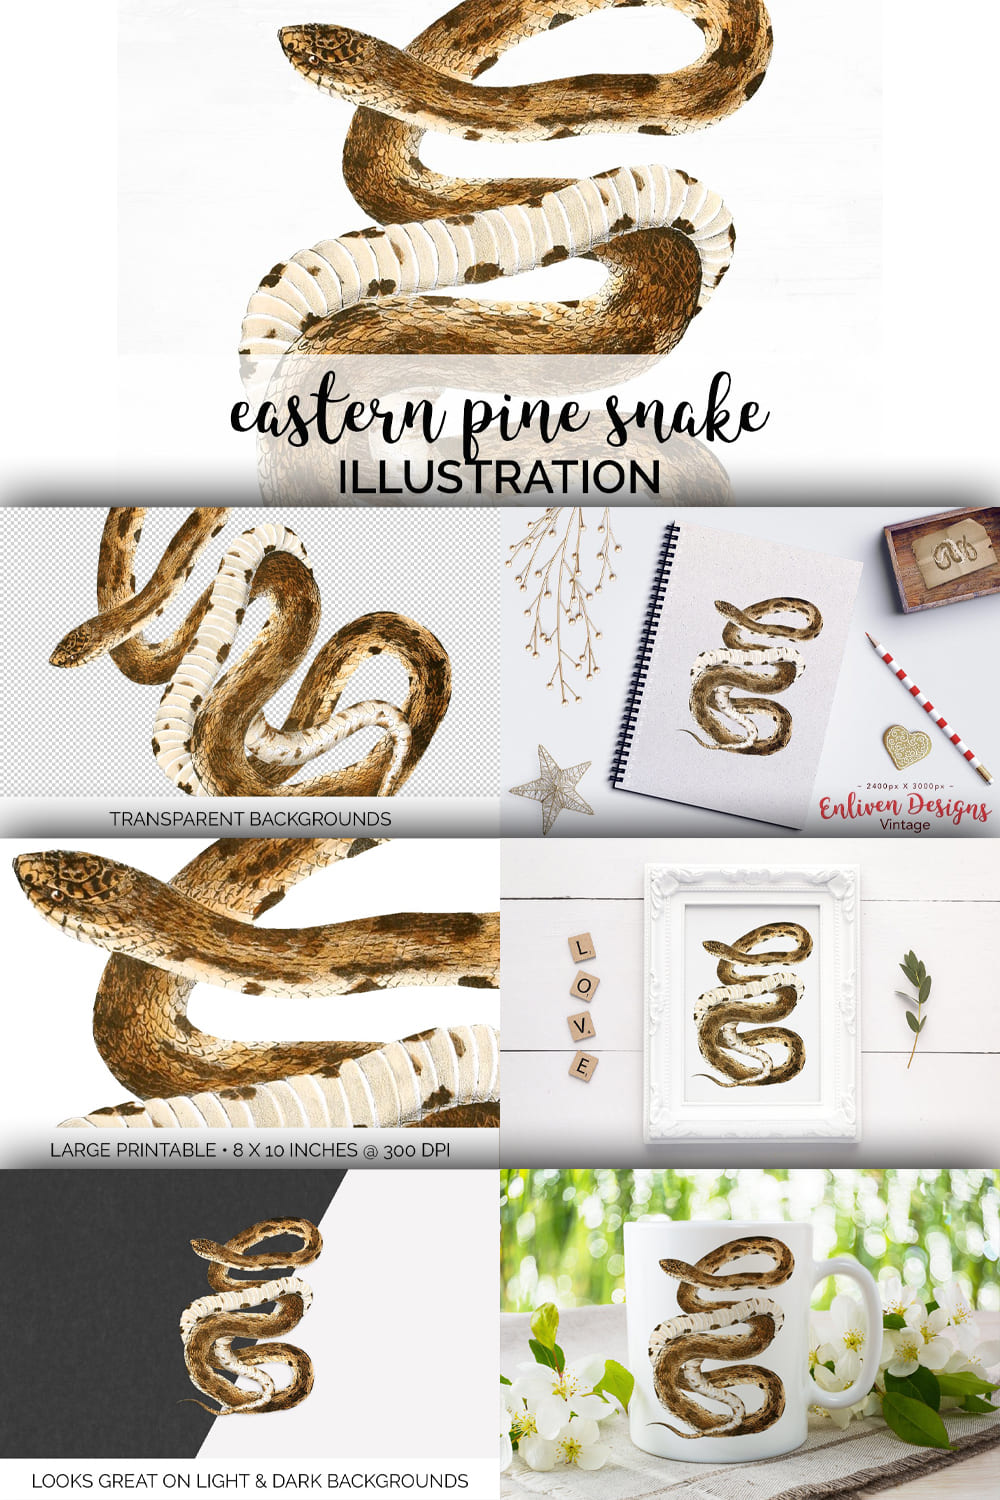 Colorful set of images with eastern pine snake.